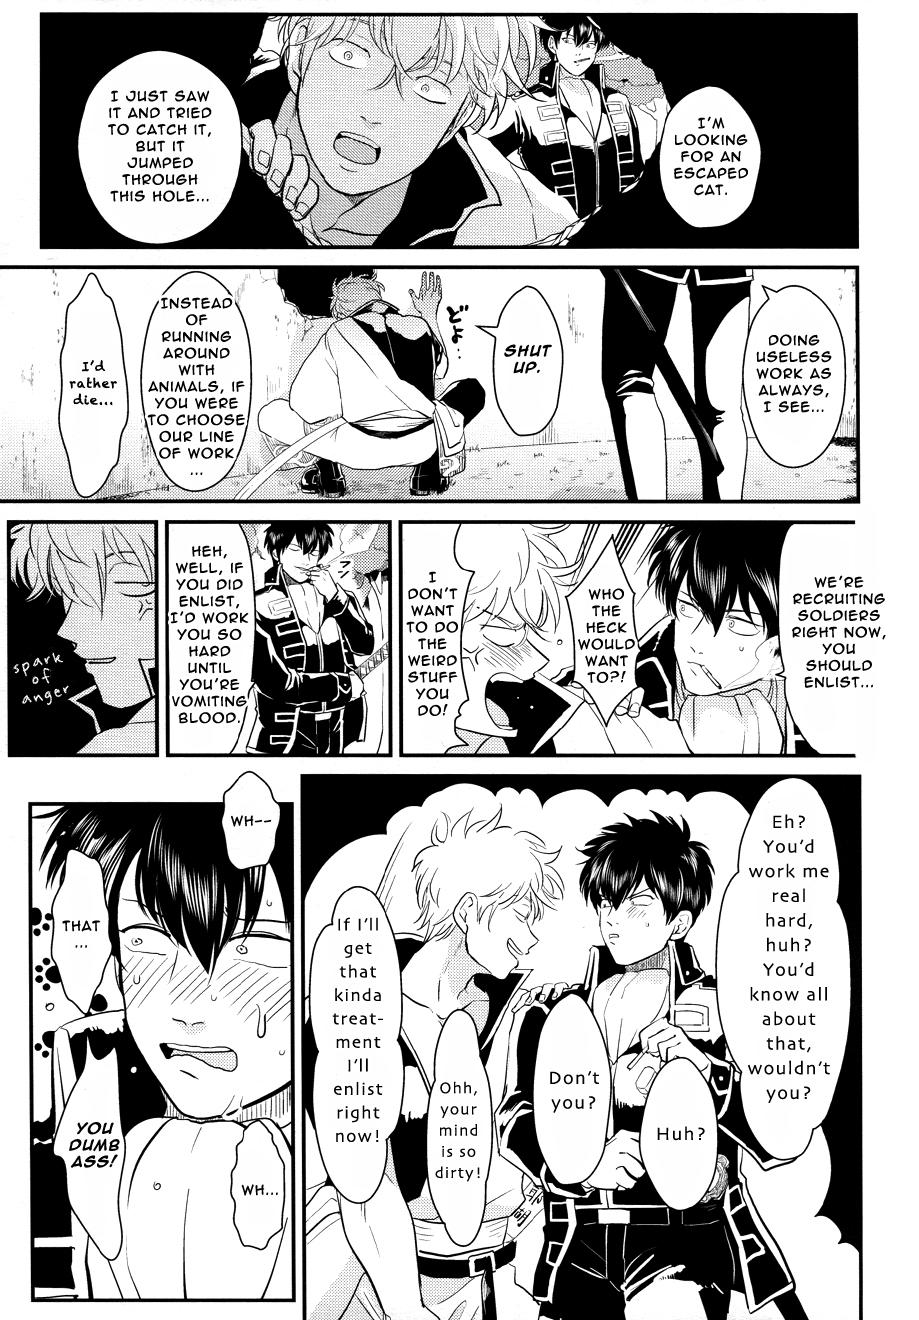 Spreading Kabe - Gintama Picked Up - Page 7